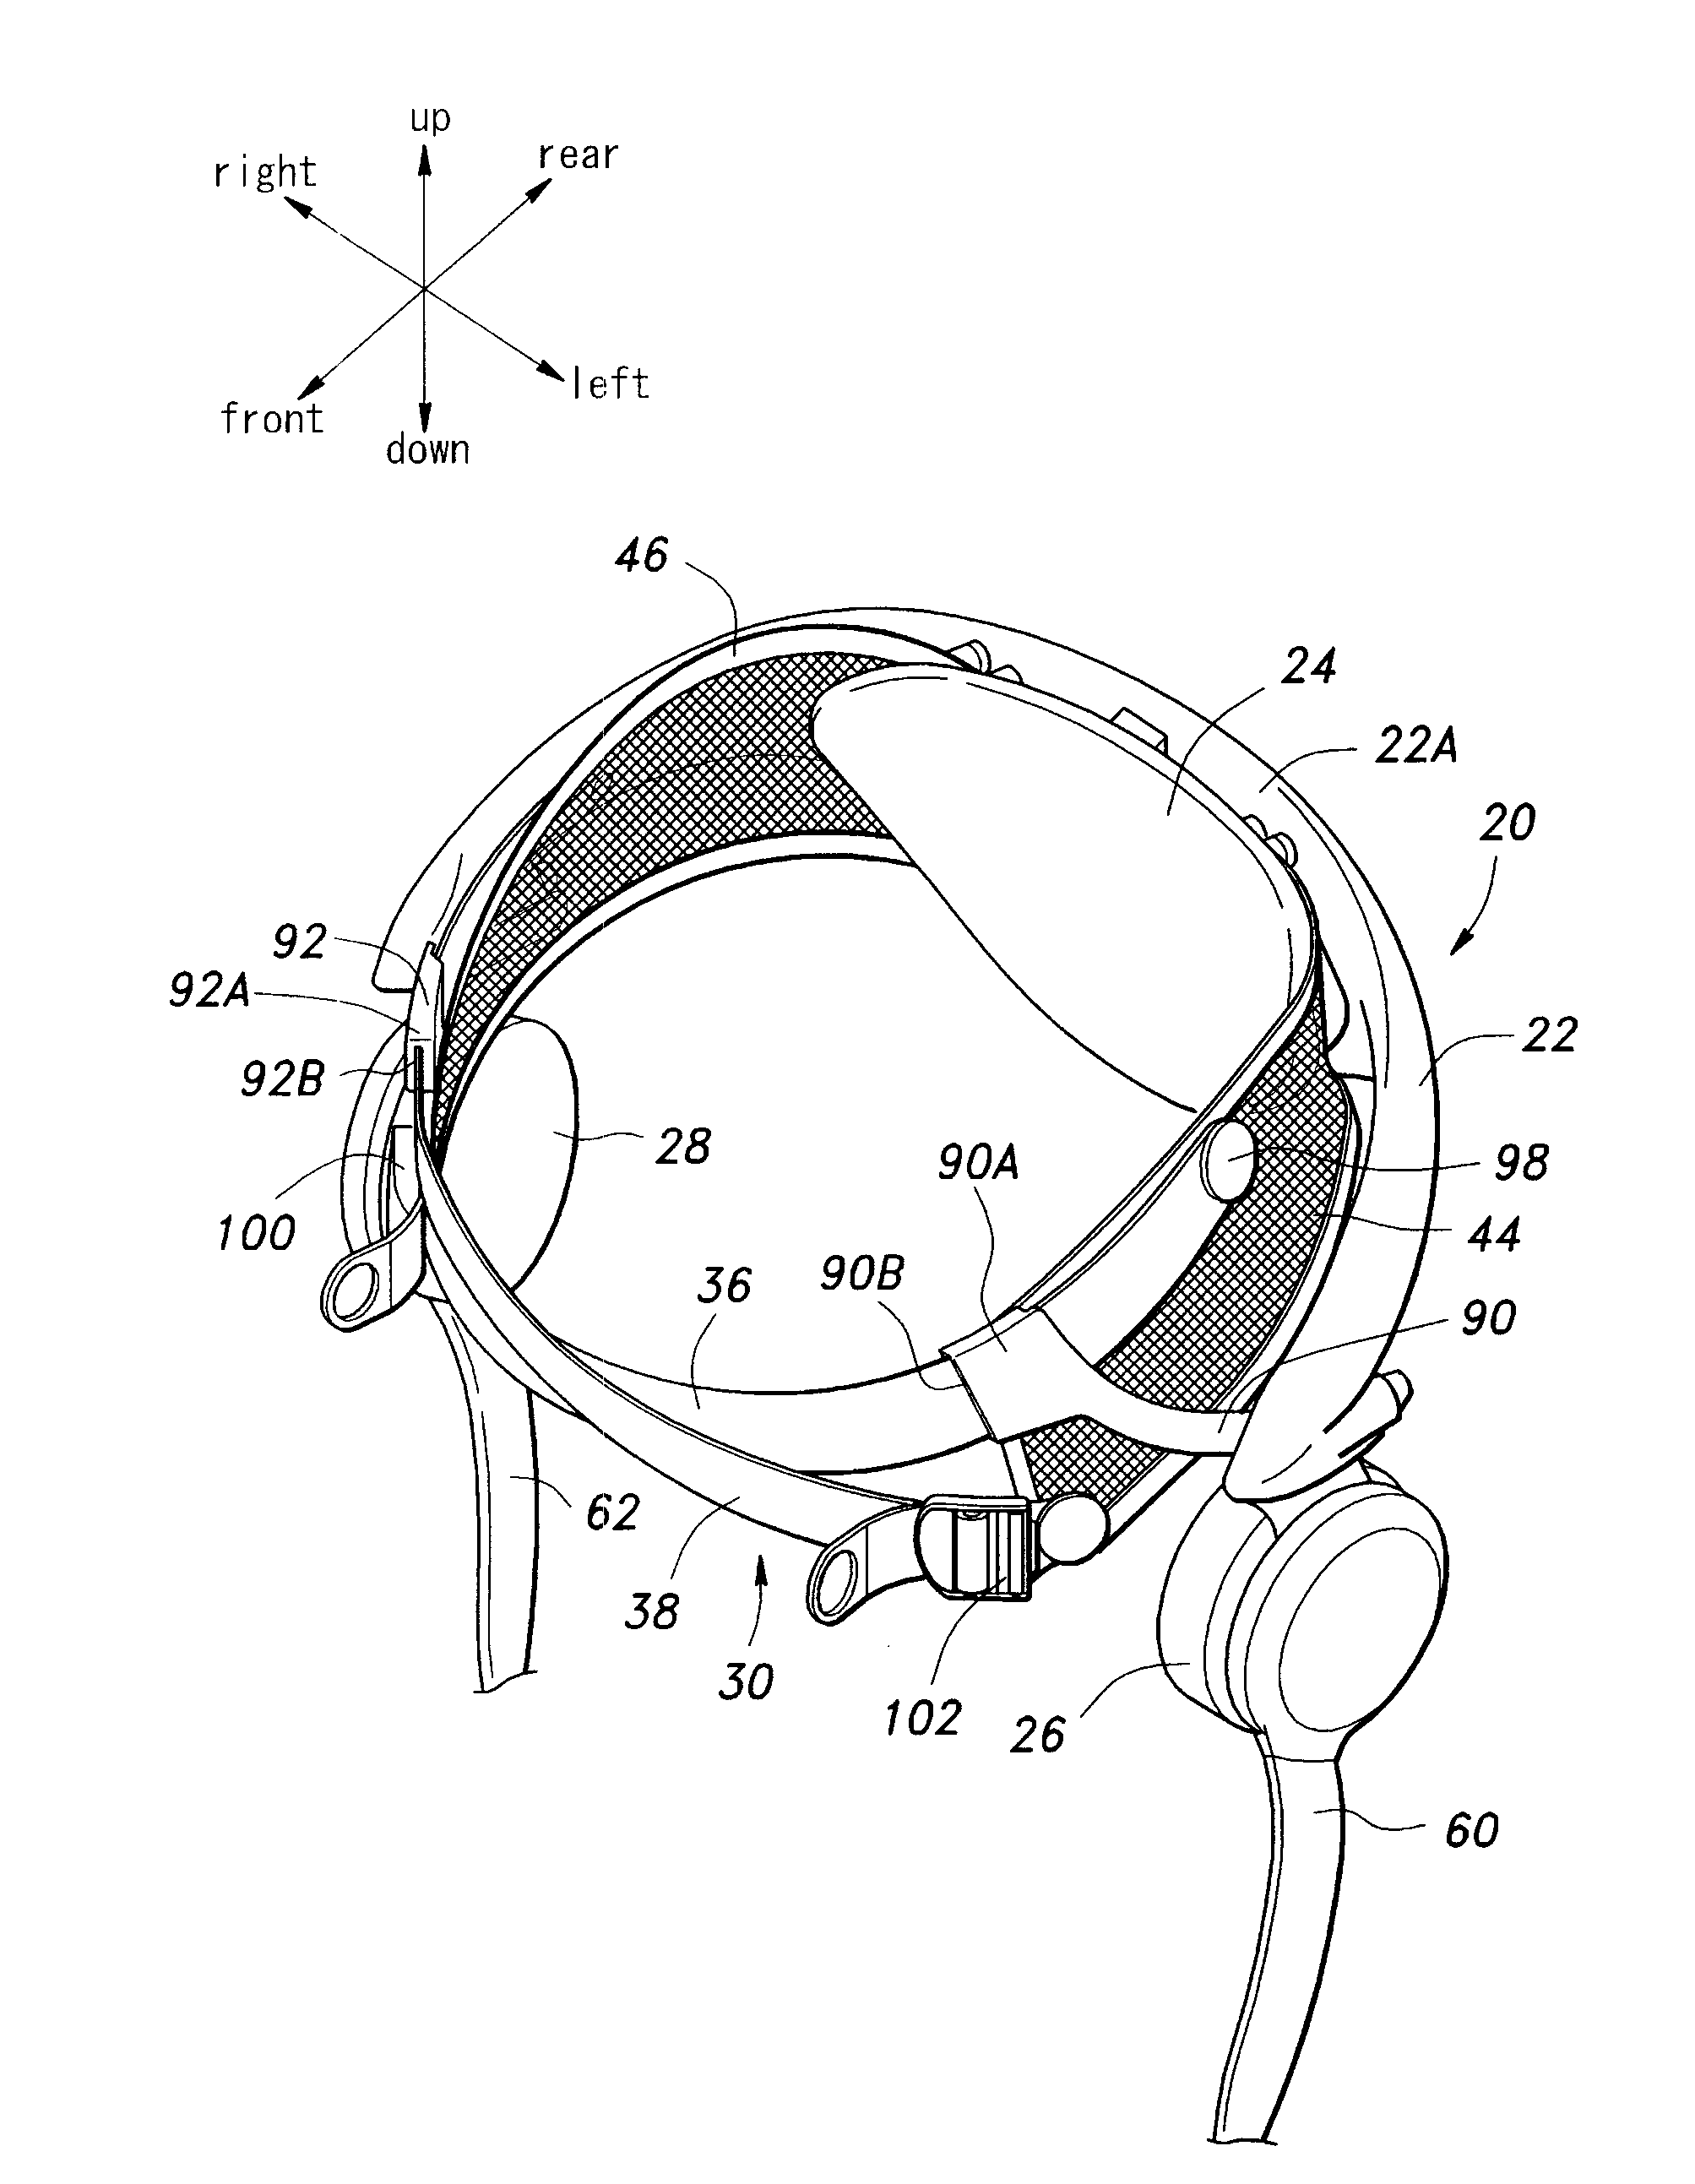 Pelvic frame and walking assistance device using the same